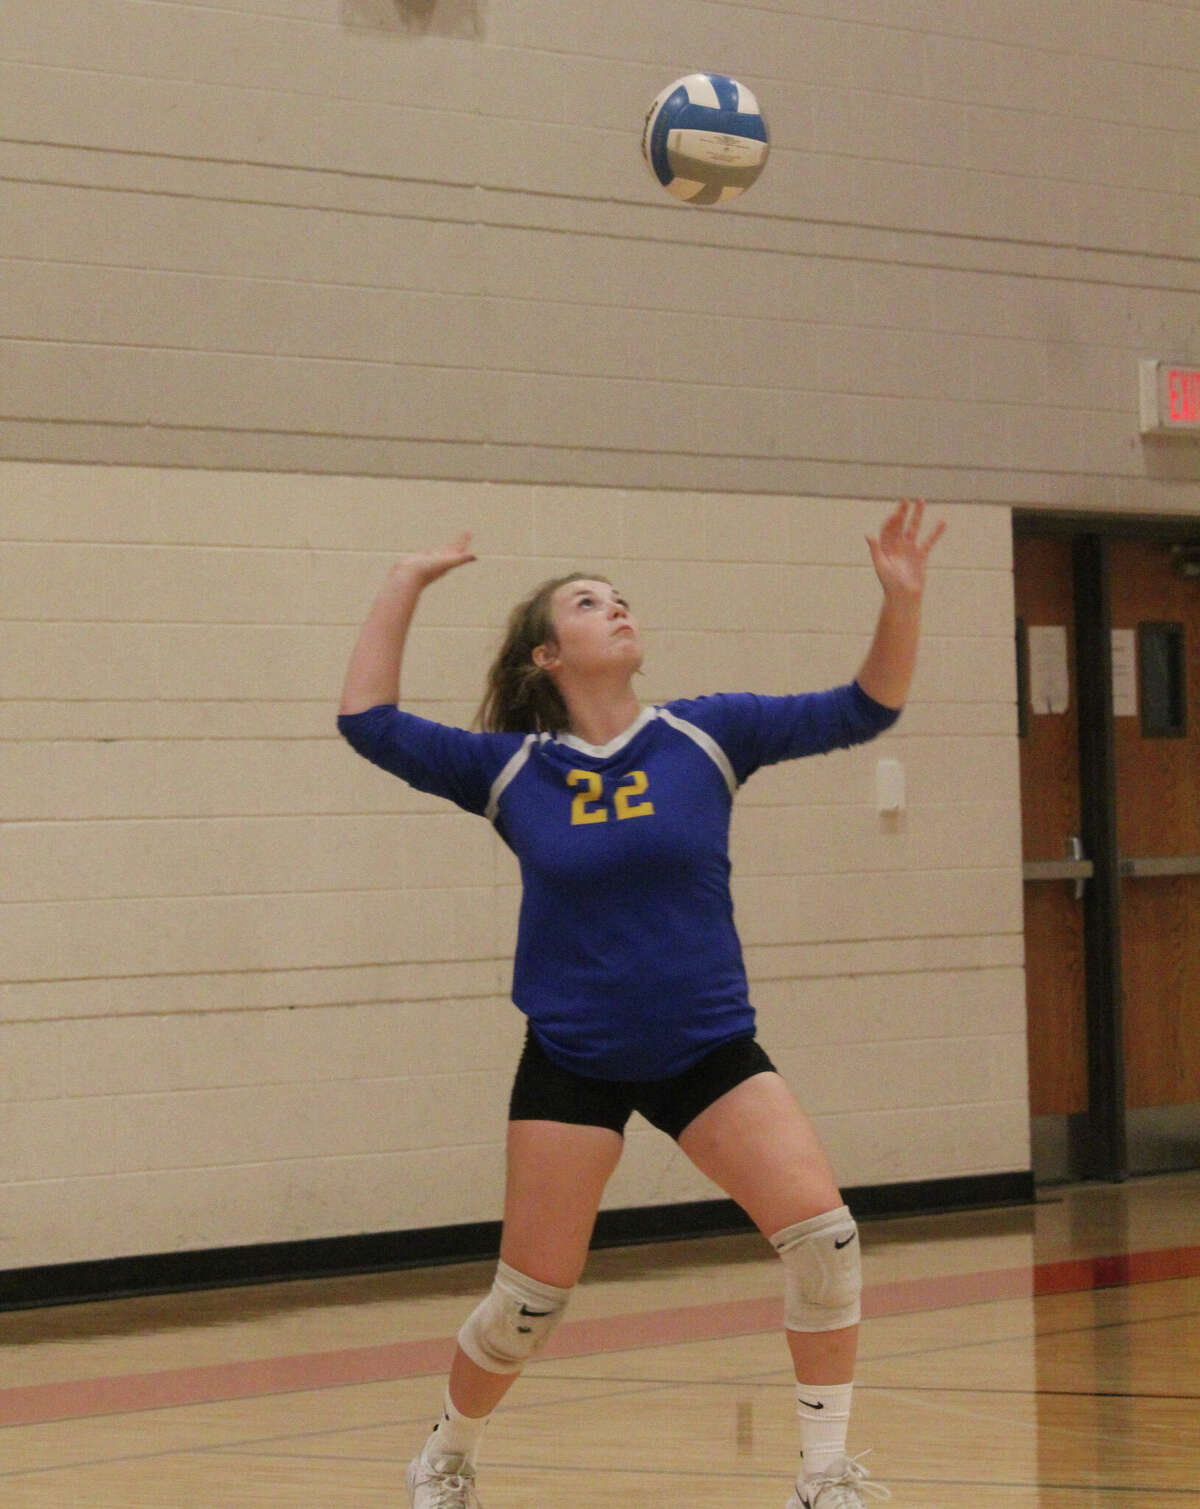 Evart's  Brooklyn Decker gets ready to serve on Saturday at the Reed City Invitational.